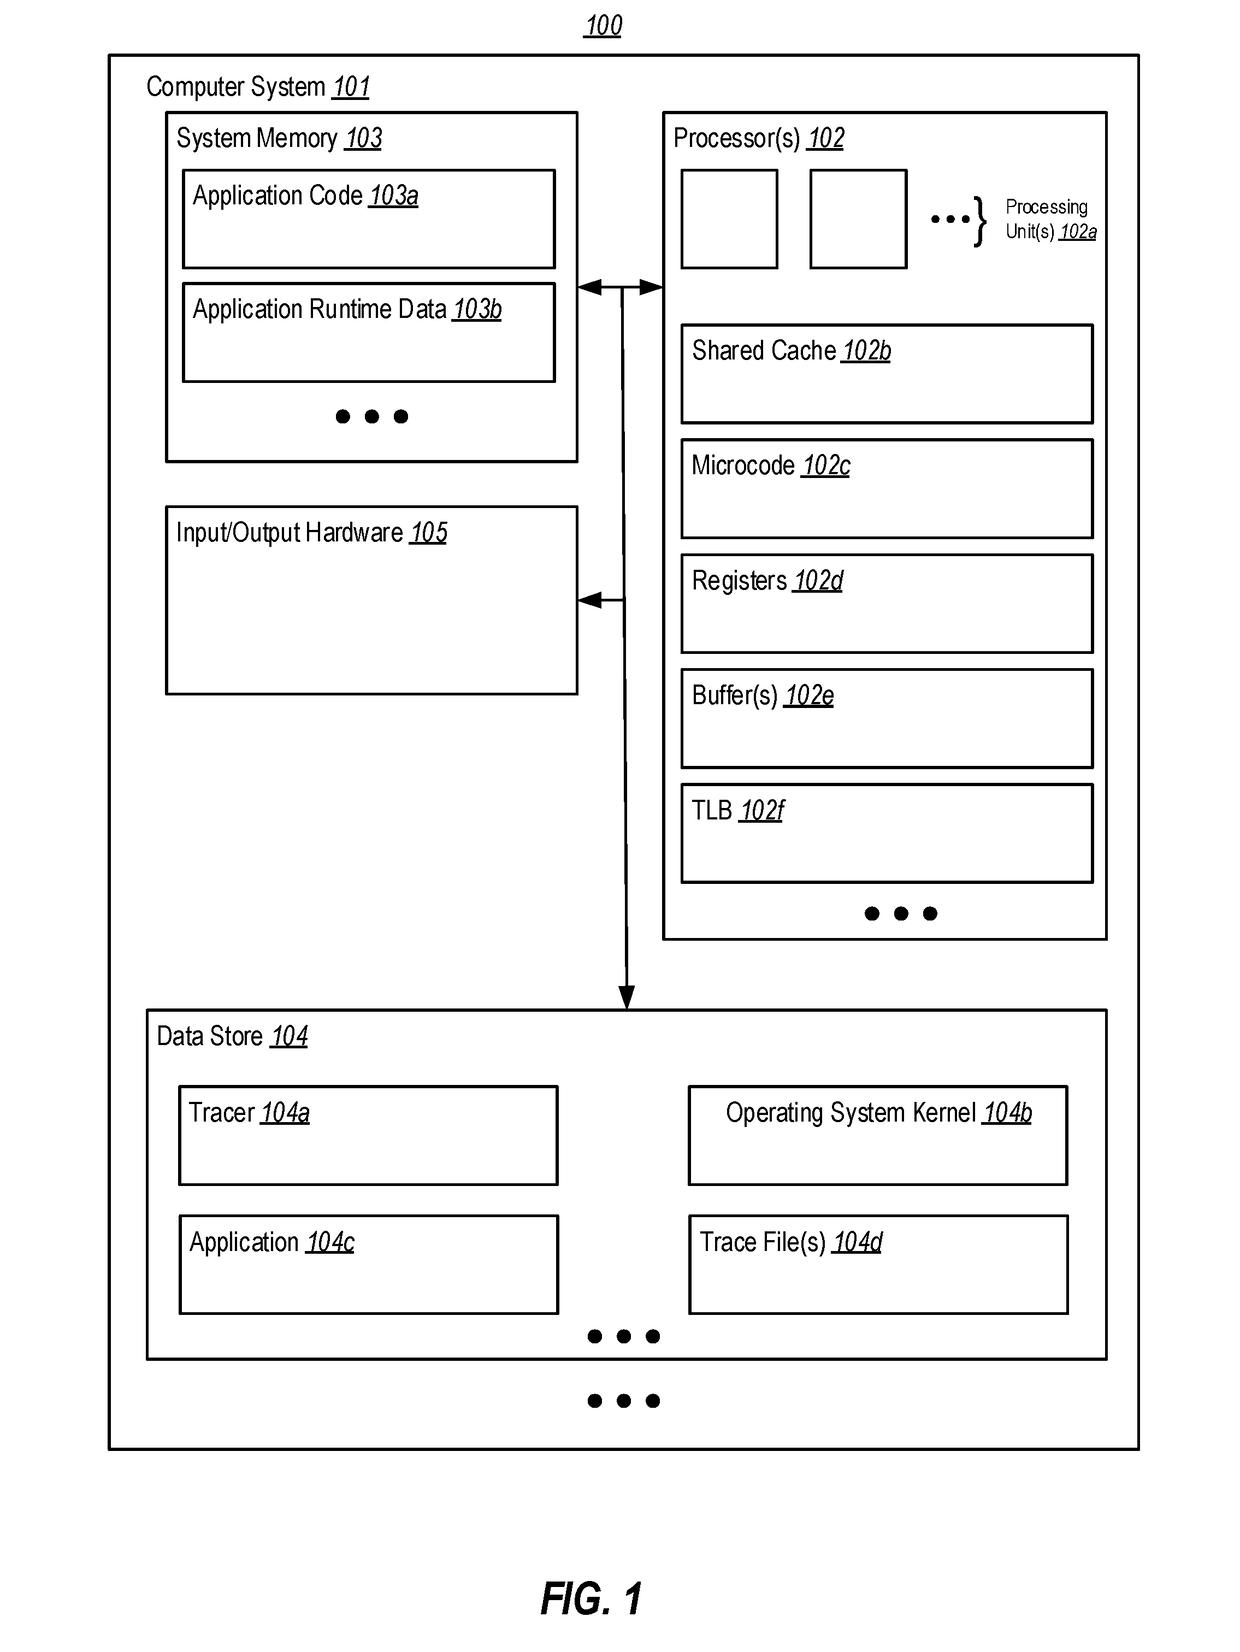 Cache-based trace recording using cache coherence protocol data